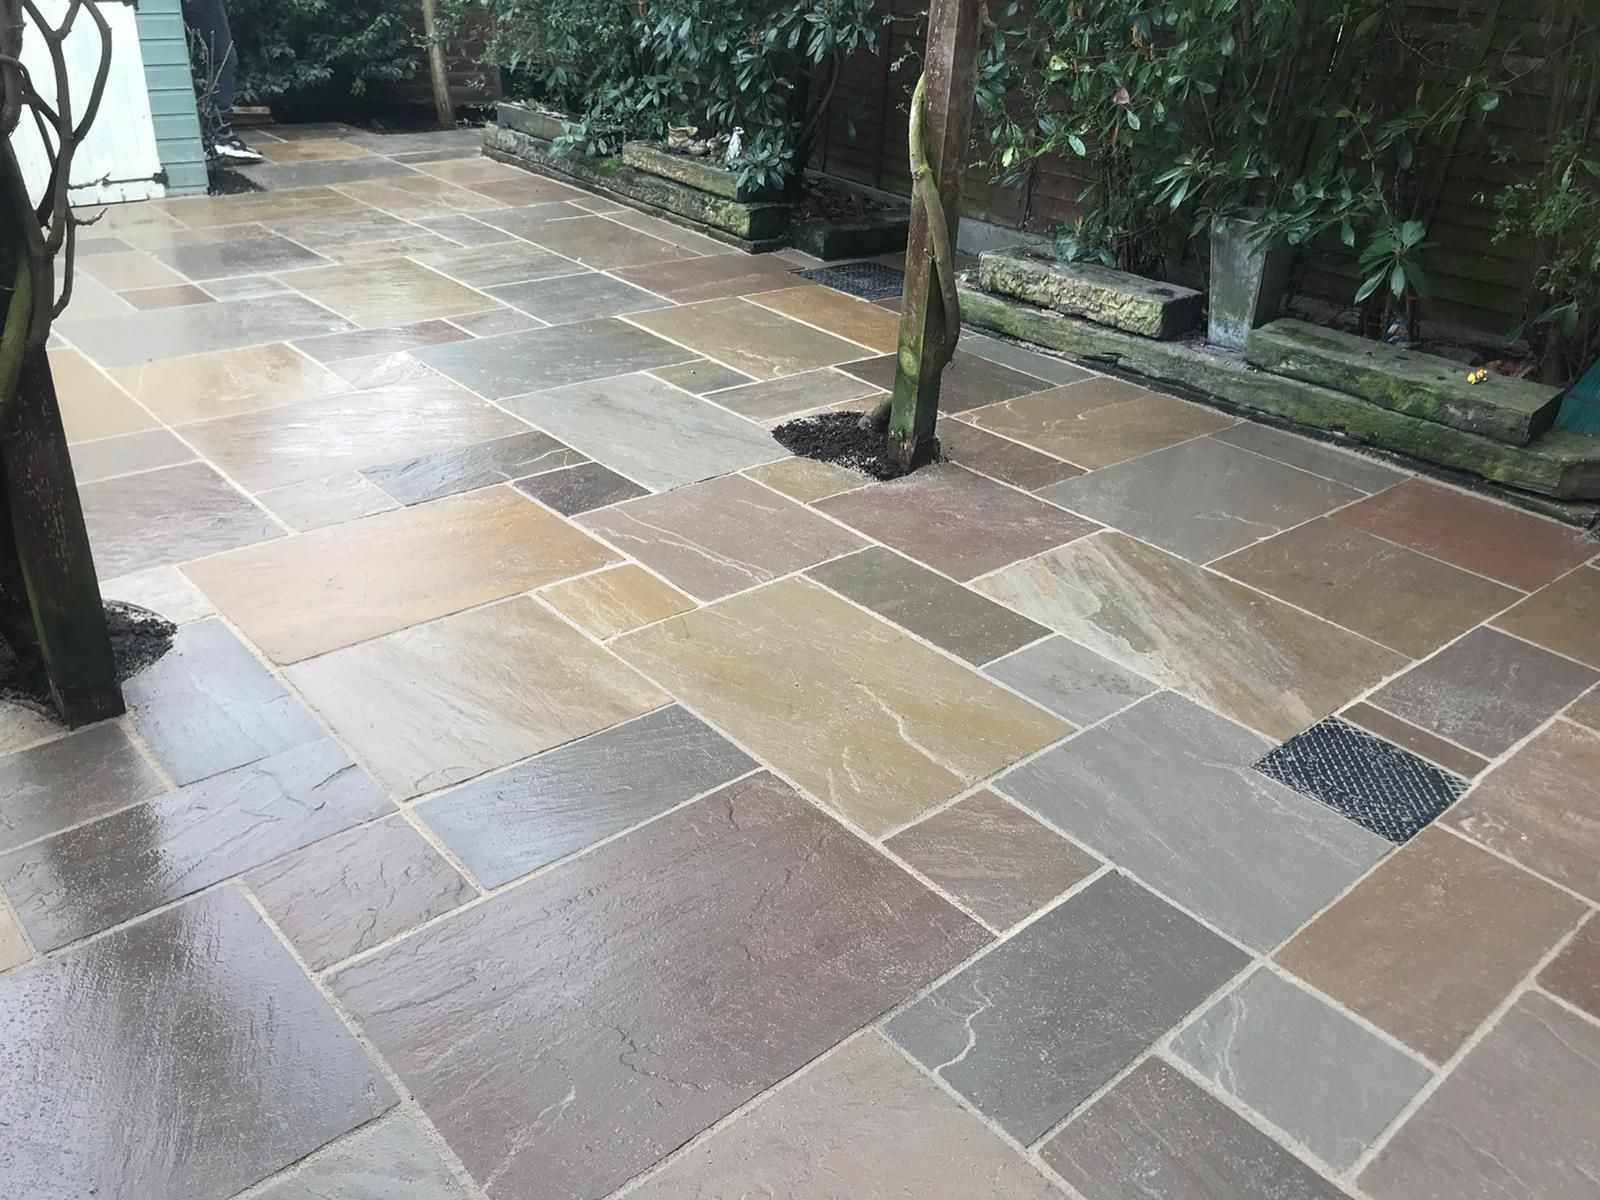 Milton Keynes natural stone driveway and patio specialists Quality Drives and Patios install stone driveways and patios throughout Buckinghamshire, Bedfordshire, Hertfordshire and Northamptonshire